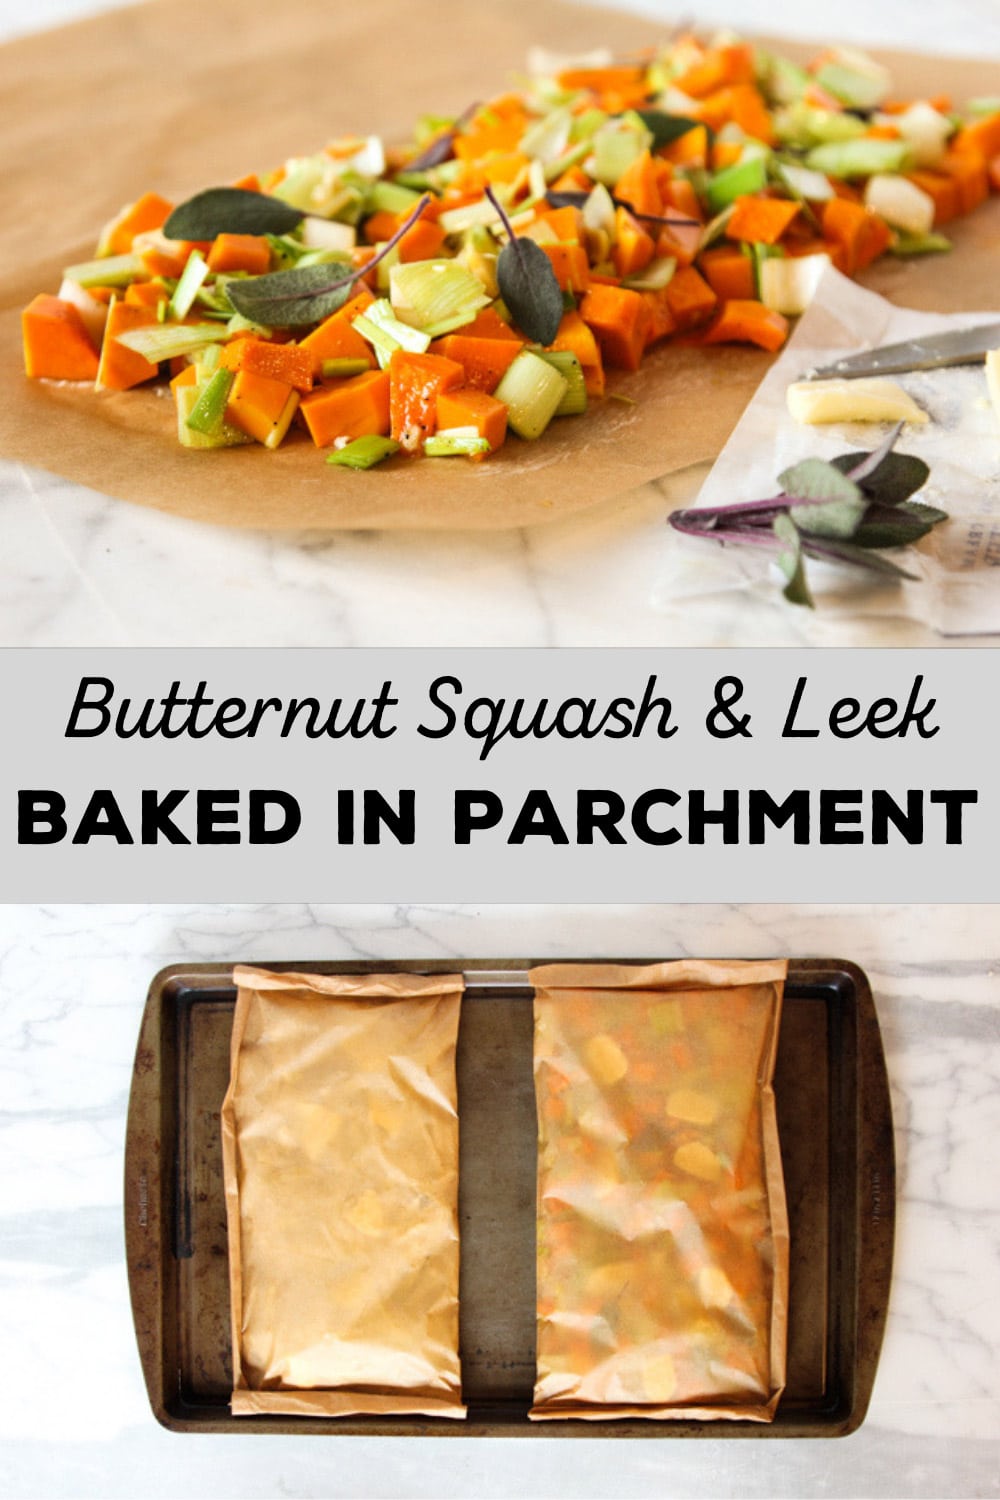 Butternut Squash & Leeks Baked in Parchment